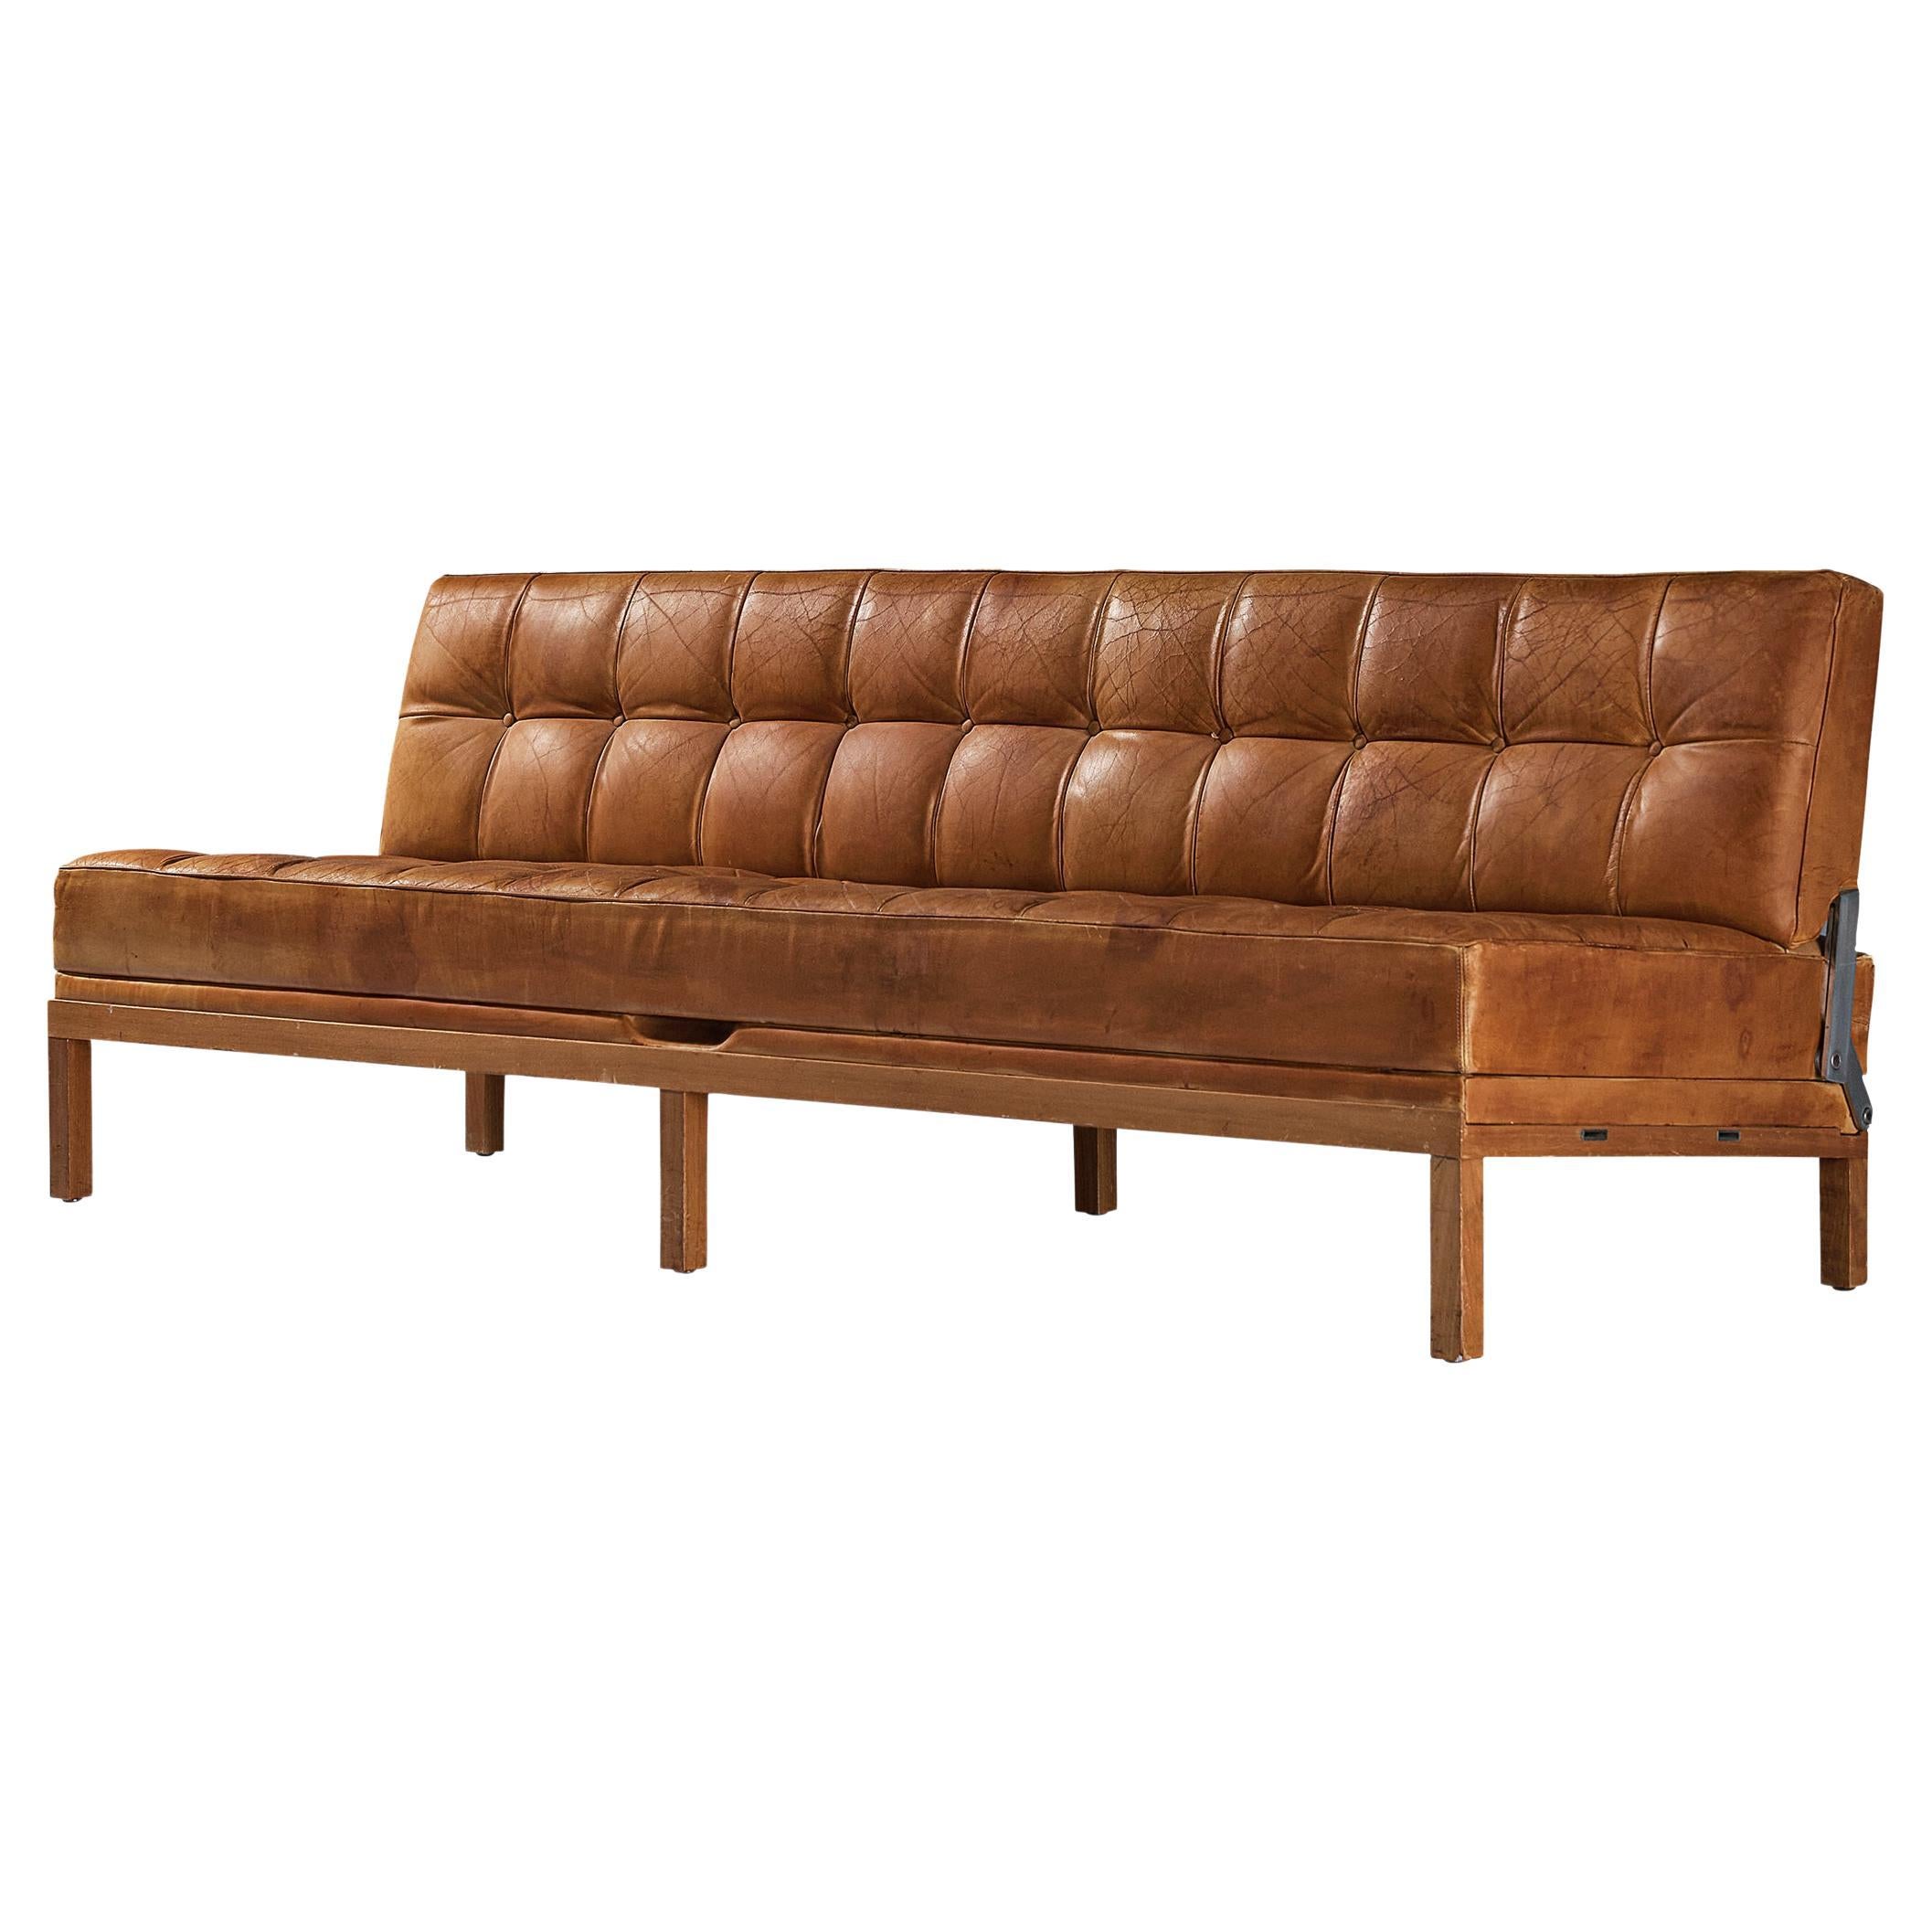 Johannes Spalt 'Constanze' Sofa or Daybed 